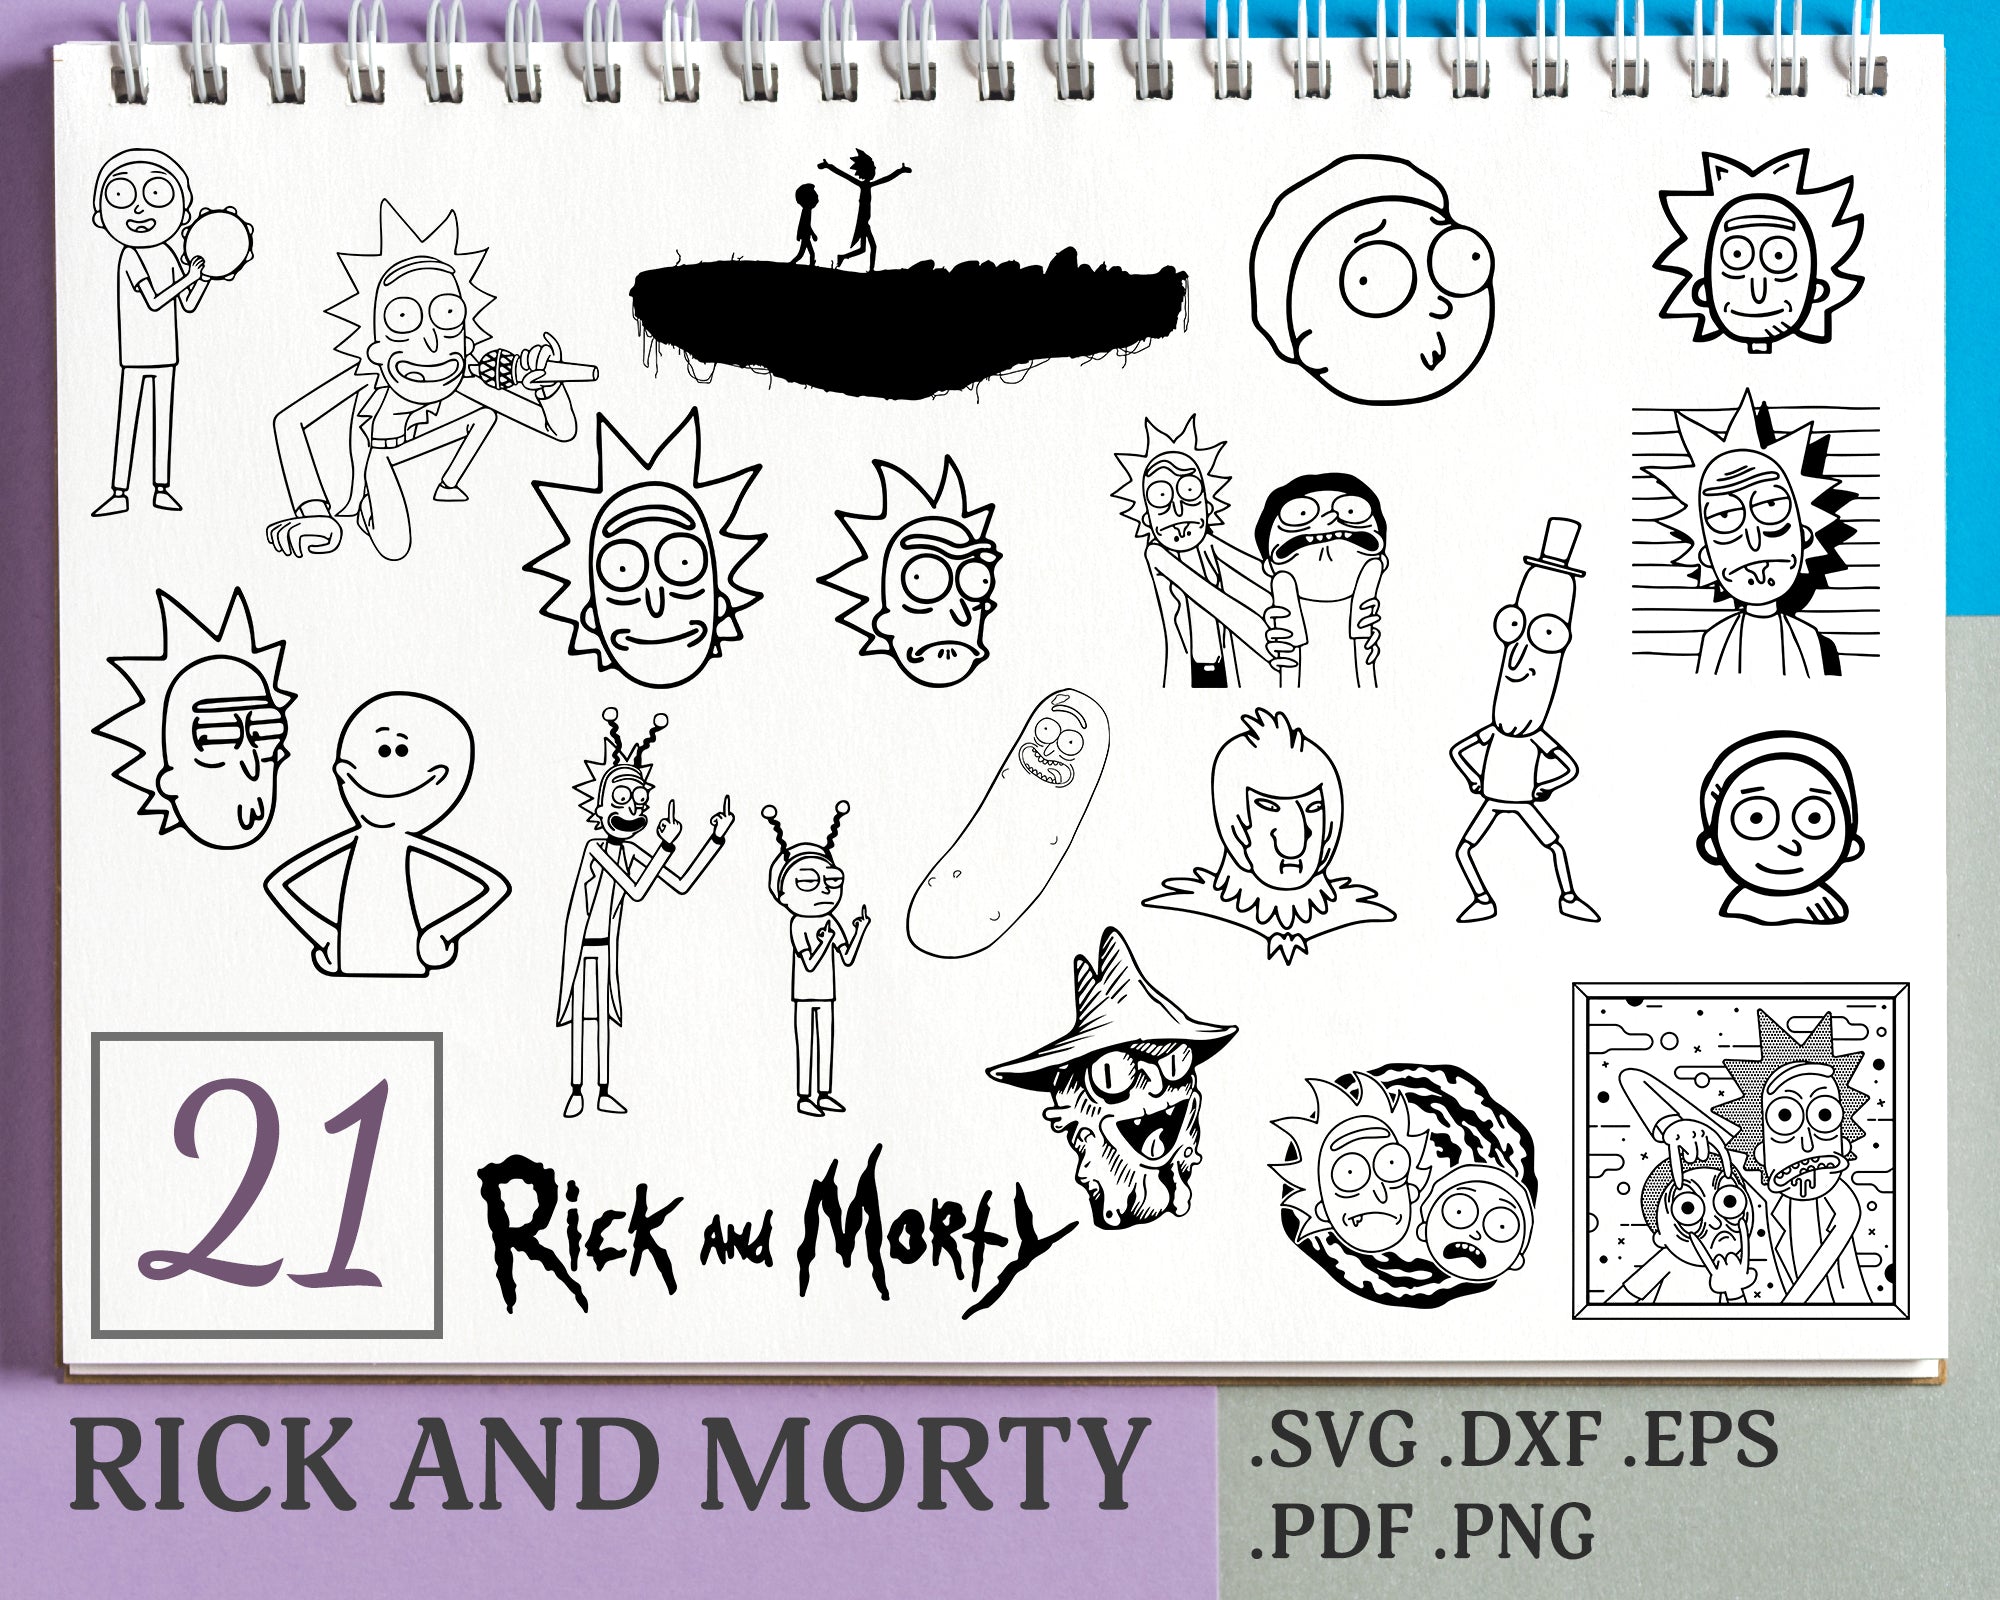 Download Rick And Morty Svg Rick And Morty Vector 3 Pack Rick And Morty Clip Clipartic